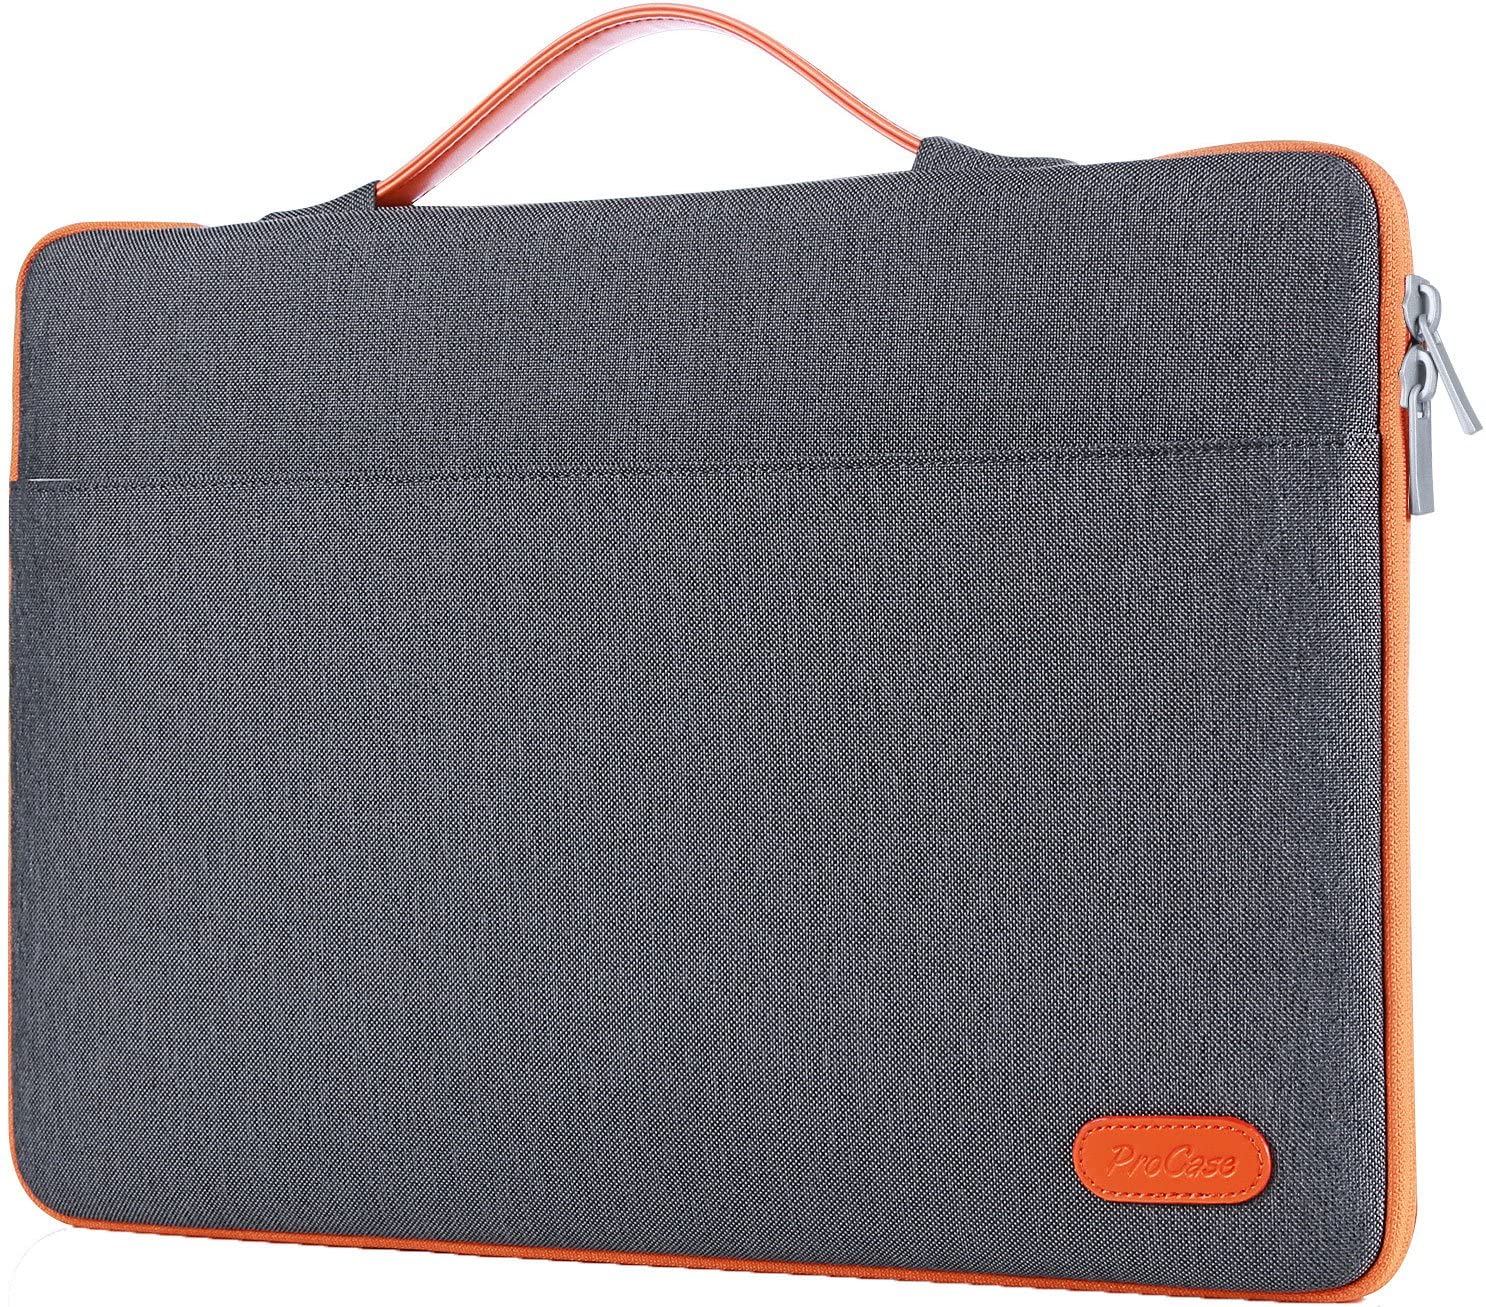 Laptop Sleeve Case Protective Carrying Bag | ProCase grey